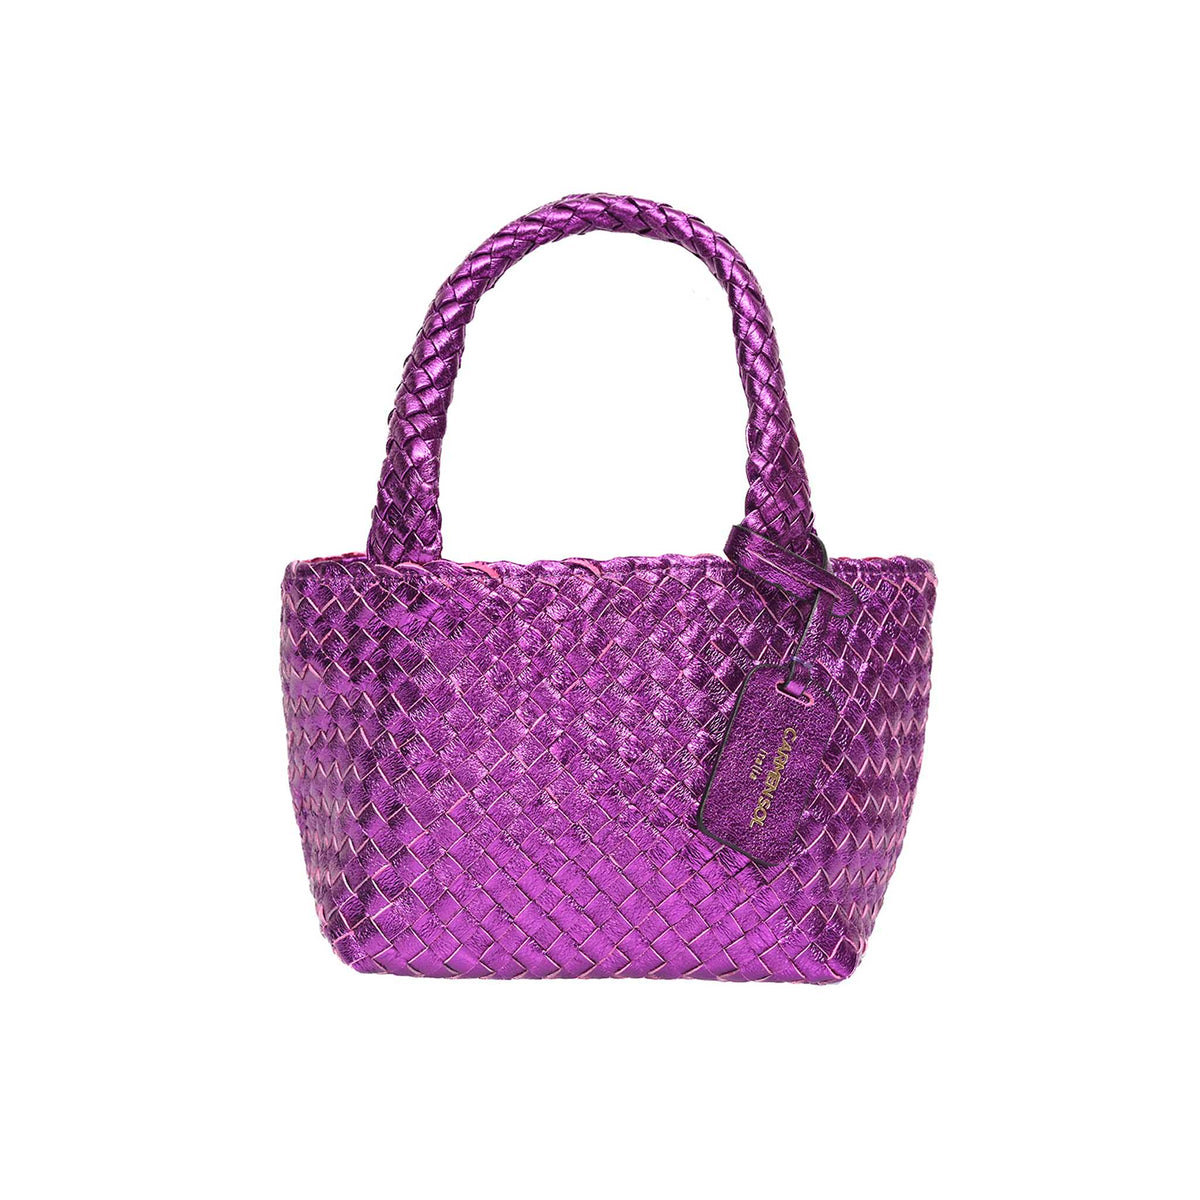 purple mini tote bag from Carmen Sol best for shopping lovers